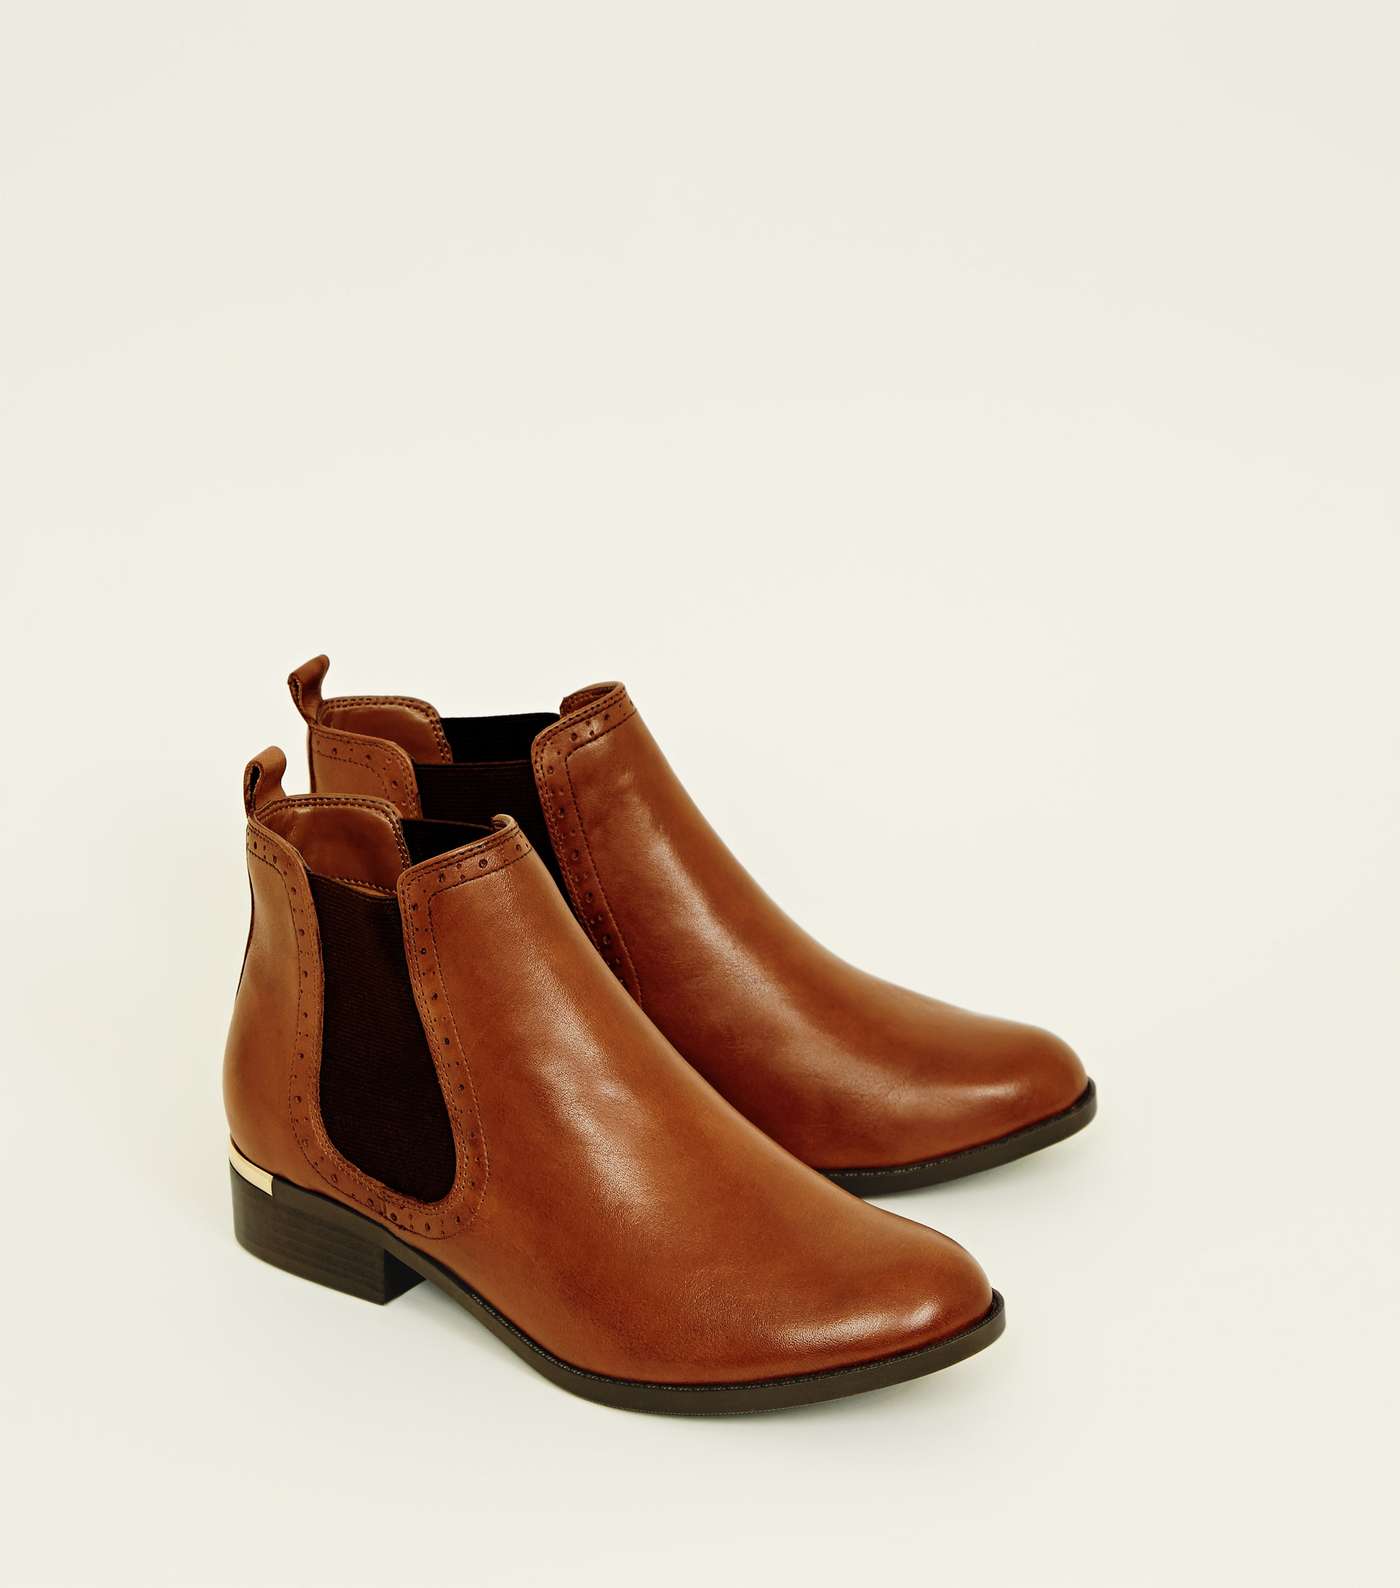 Tan Leather Metal Trim Brogue Chelsea Boots Image 3